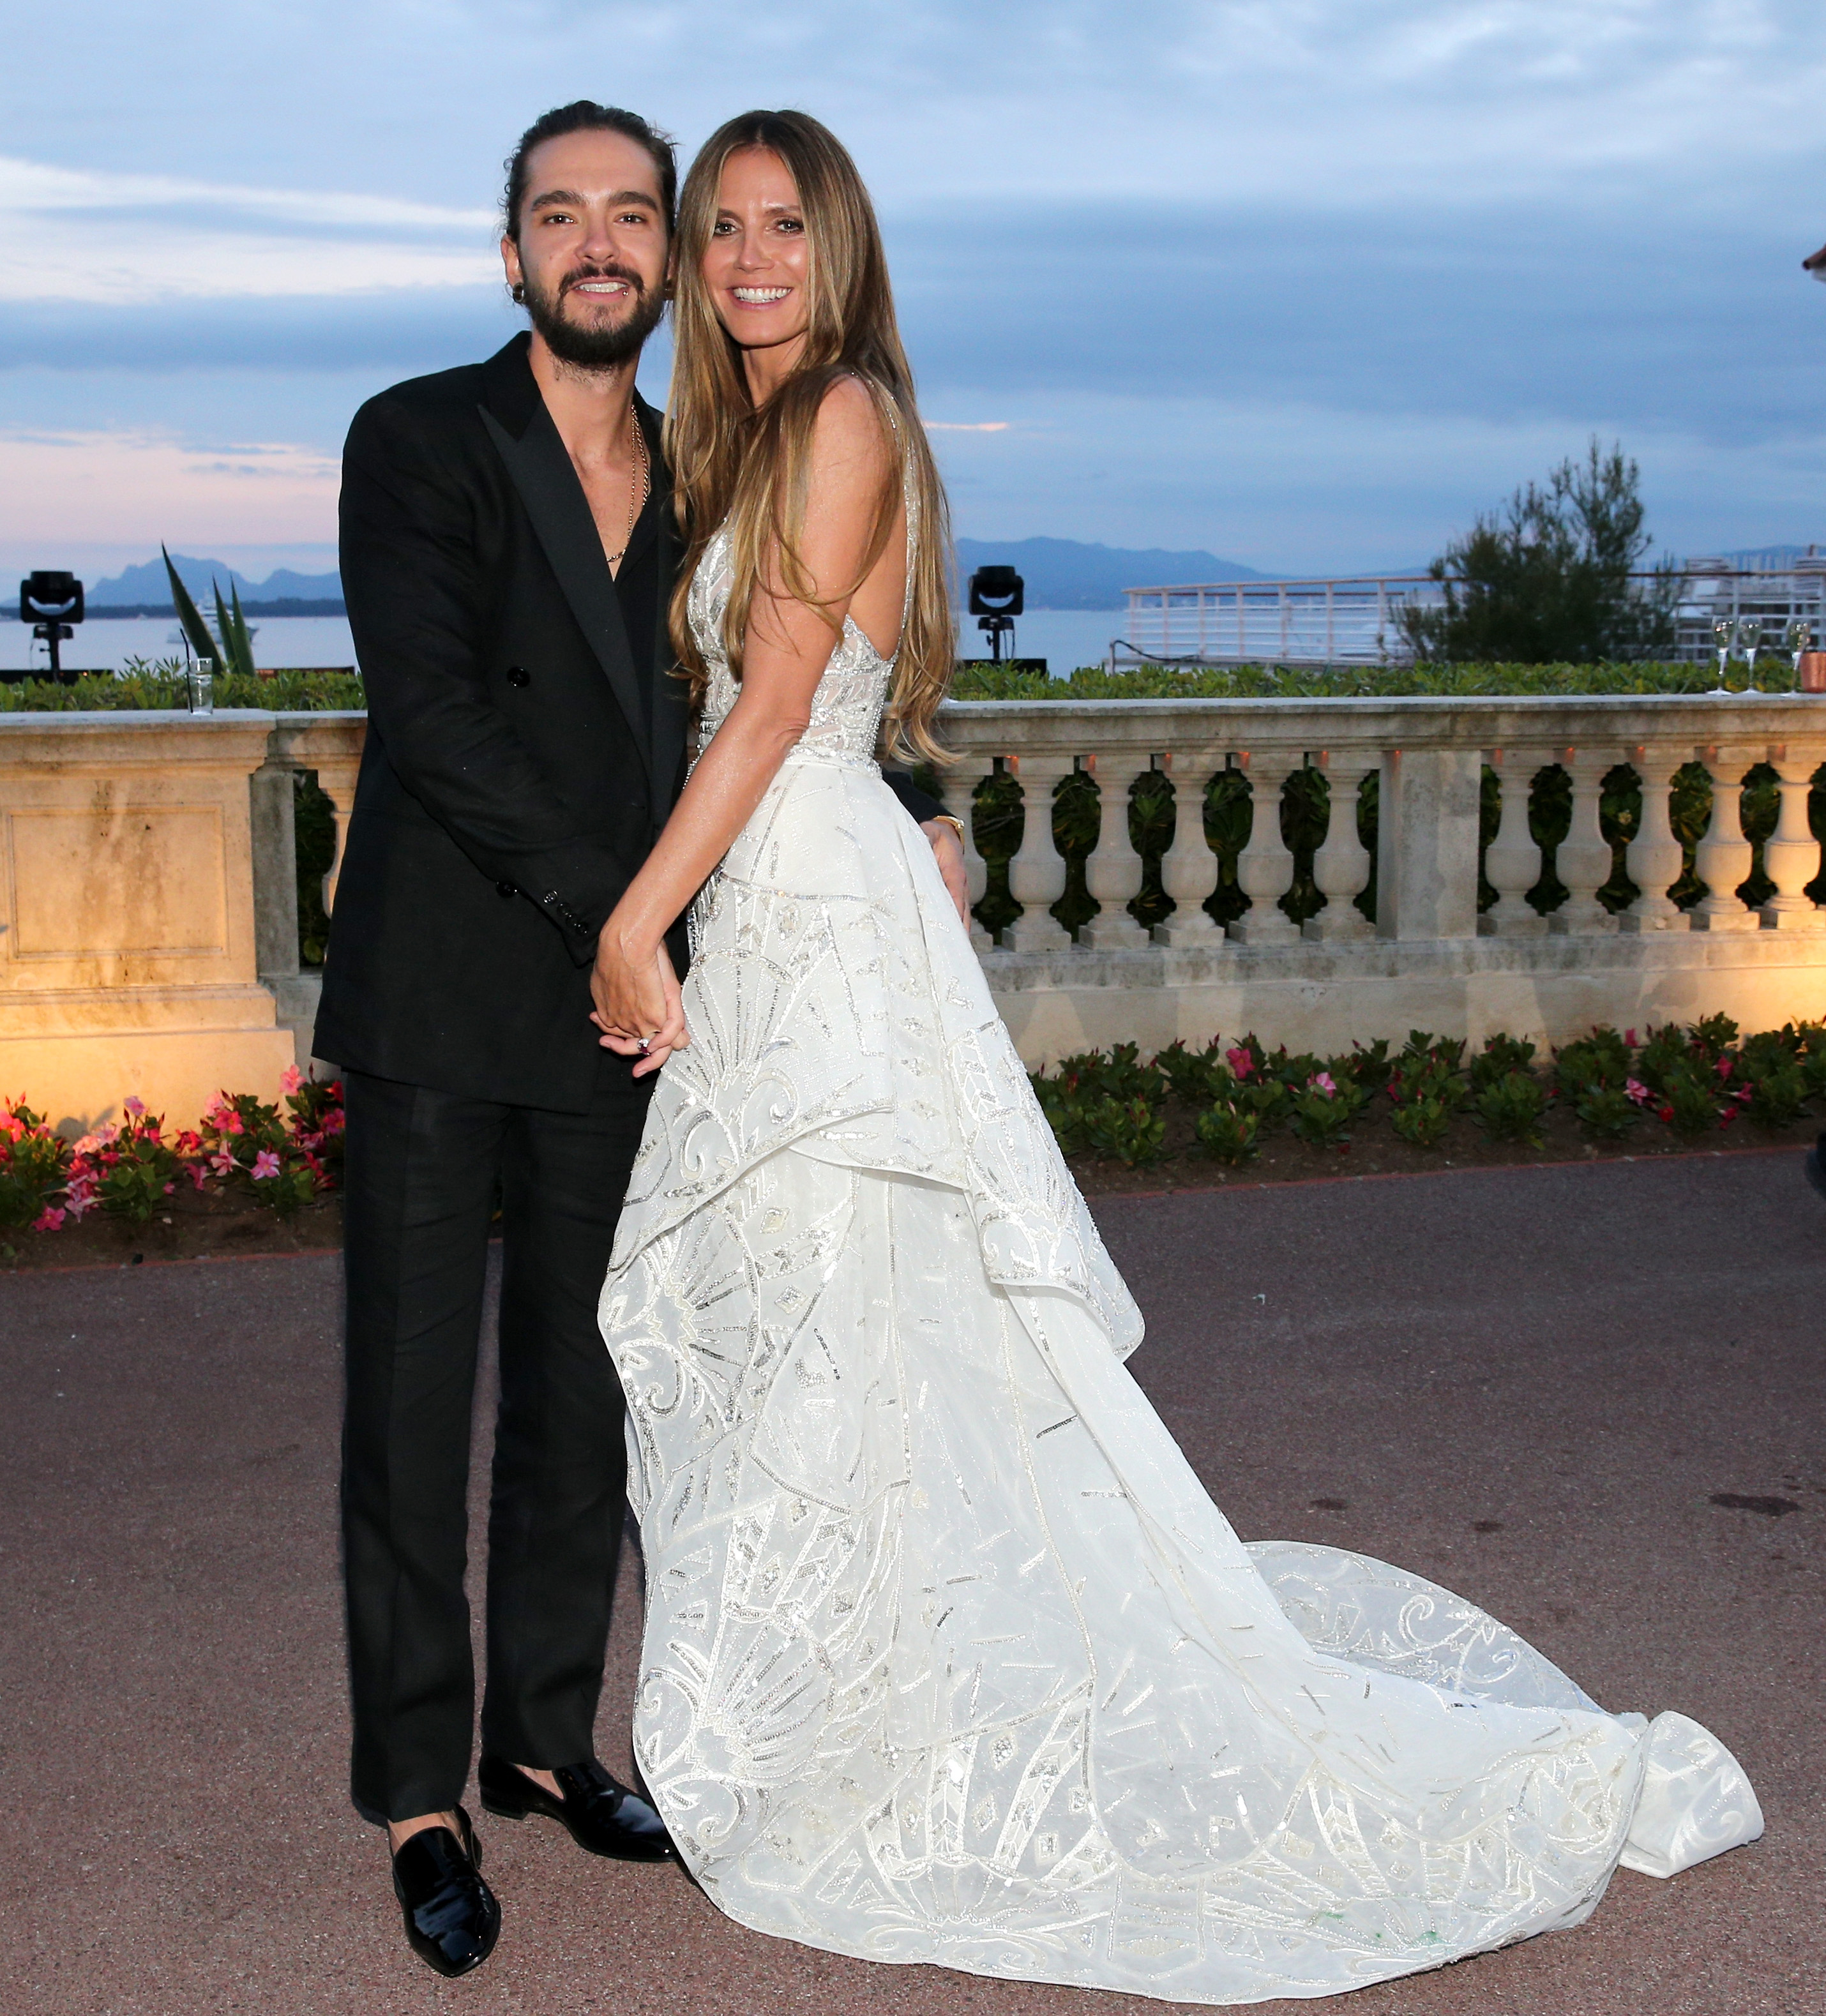 Tom Kaulitz and Heidi Klum at the amfAR Gala Cannes in Cap d'Antibes, France on May 17, 2018 | Source: Getty Images